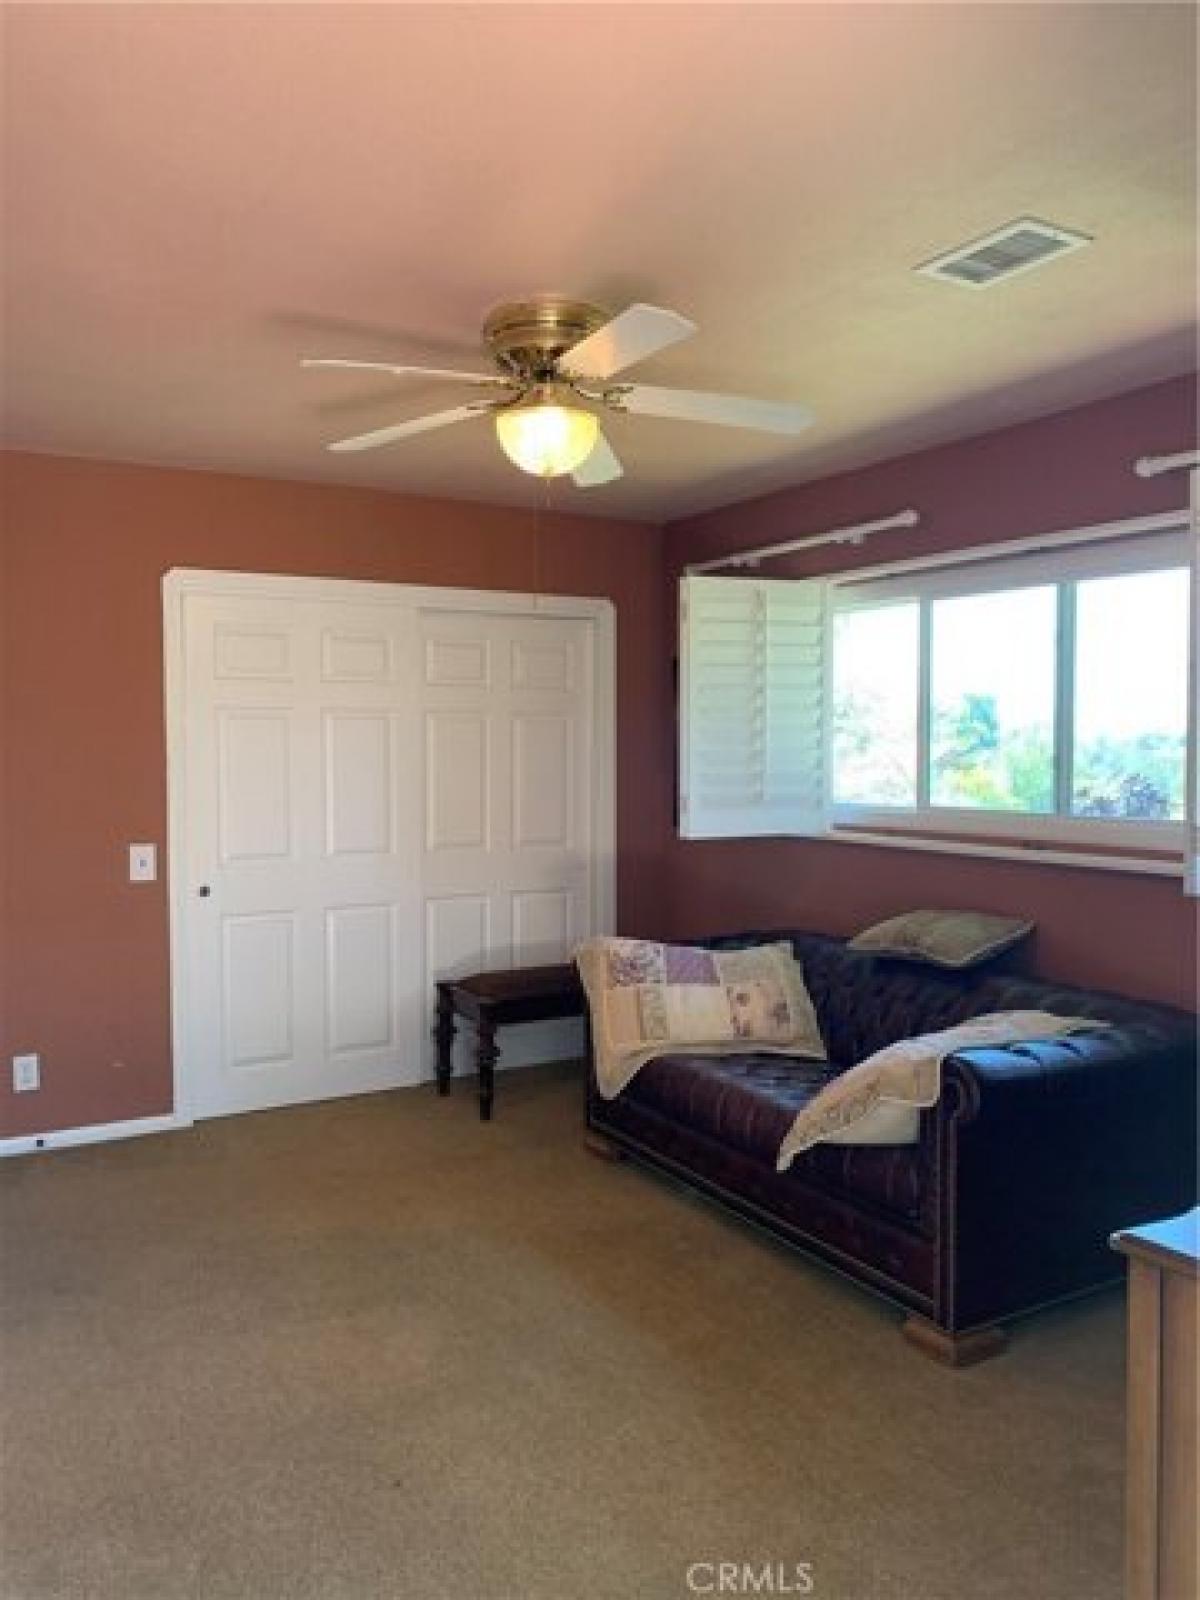 Picture of Home For Rent in Fallbrook, California, United States